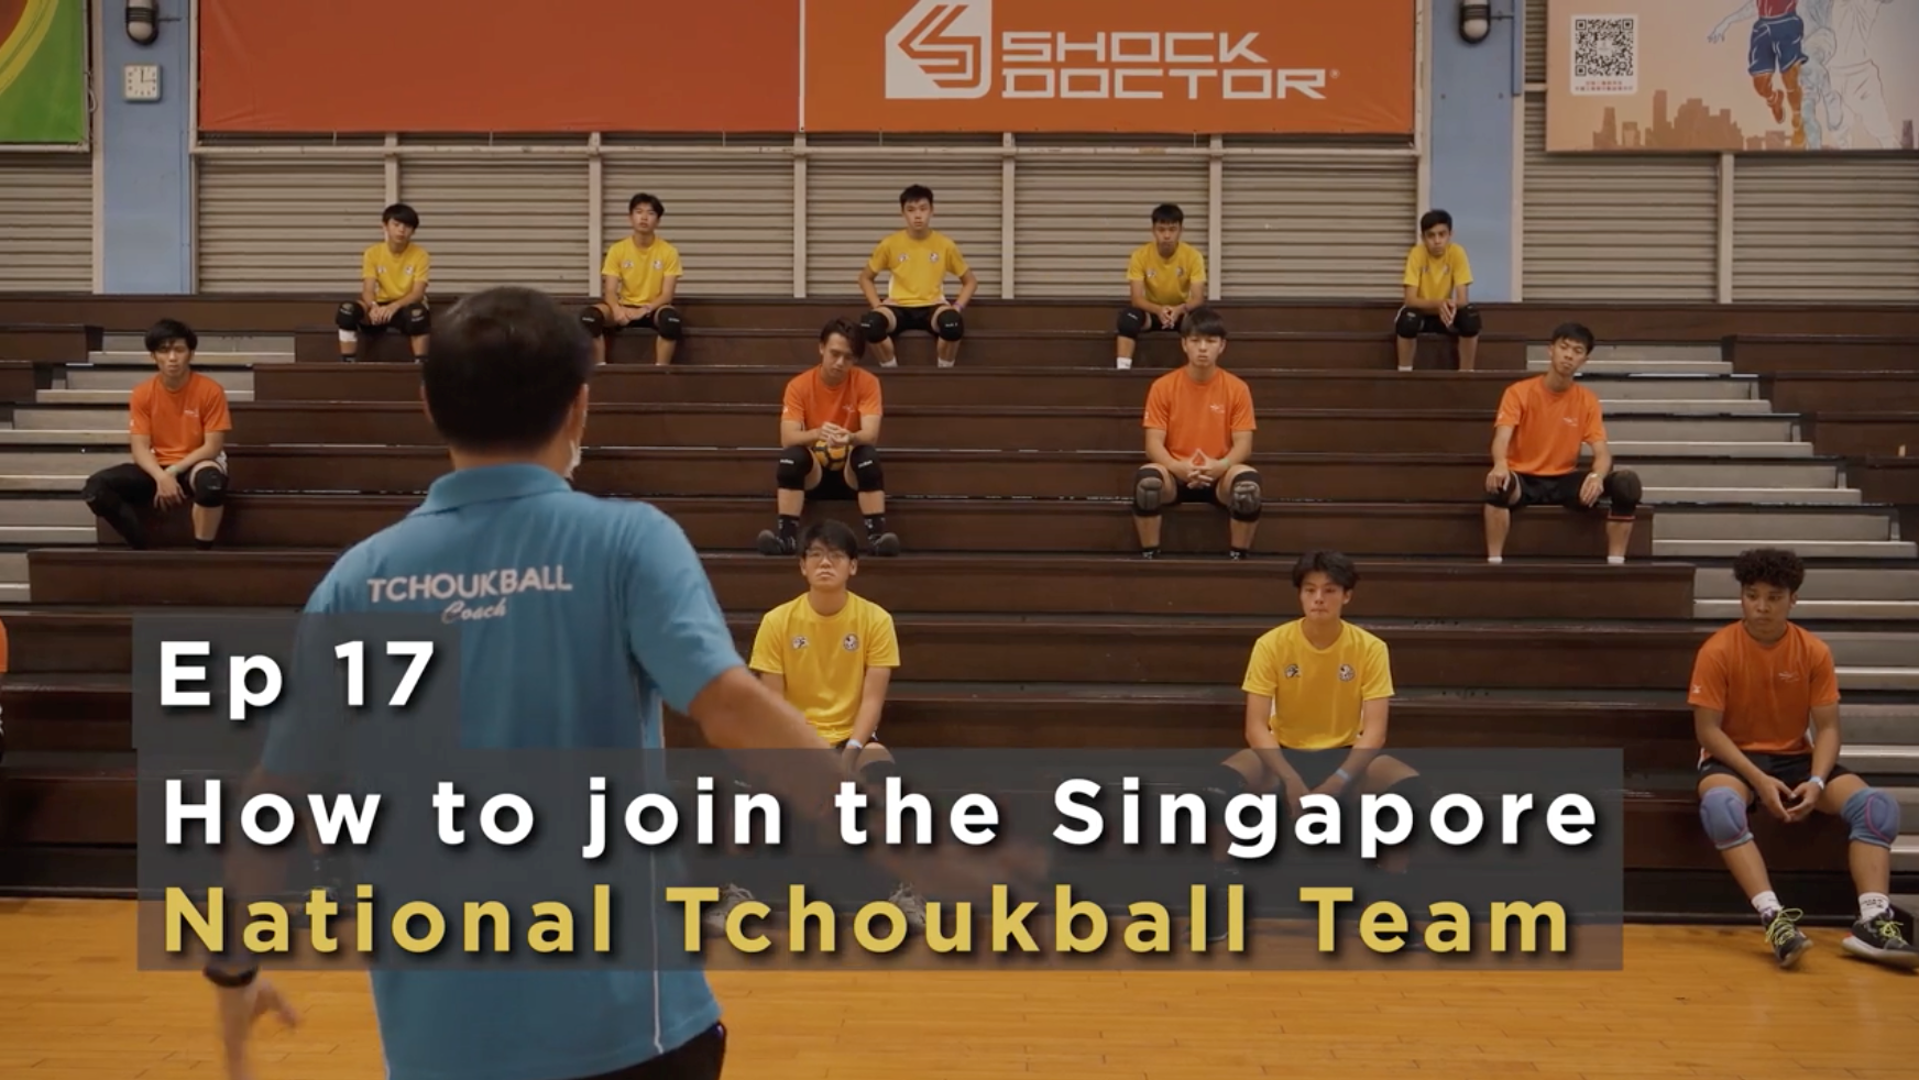 Ep 17 - How to join the Singapore National Tchoukball Team